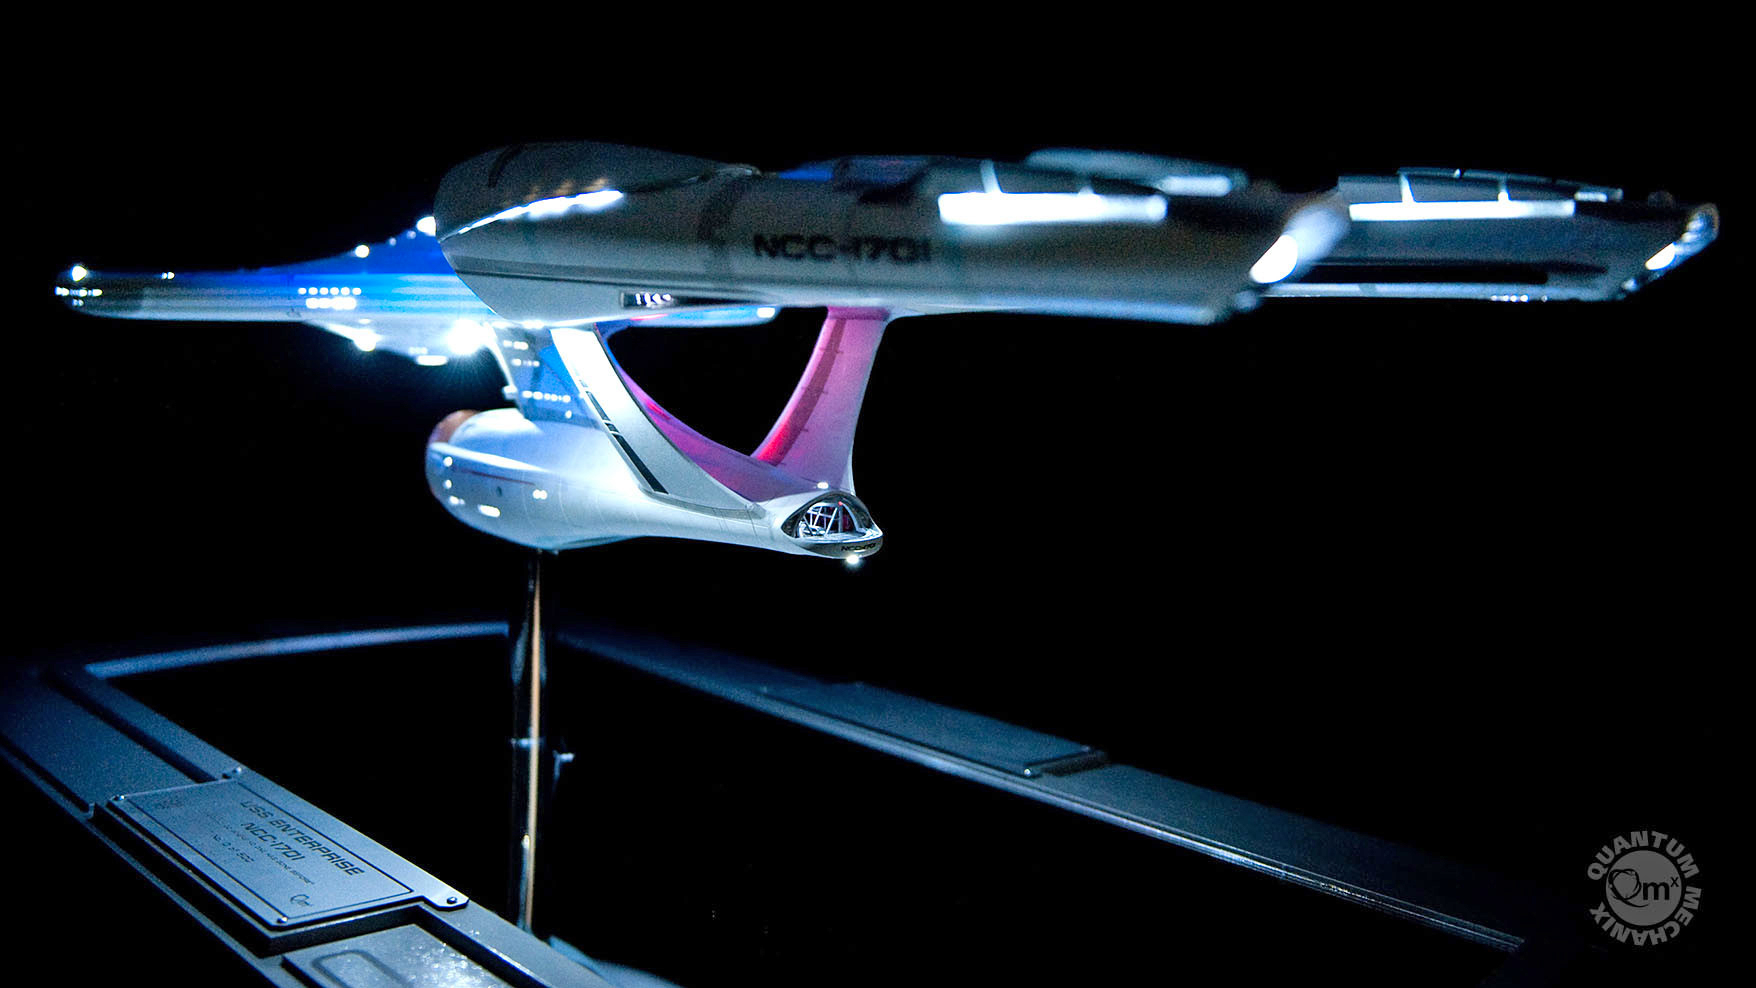 Try Not To Drool Over This Exquisite $9700 Replica Of The USS Enterprise